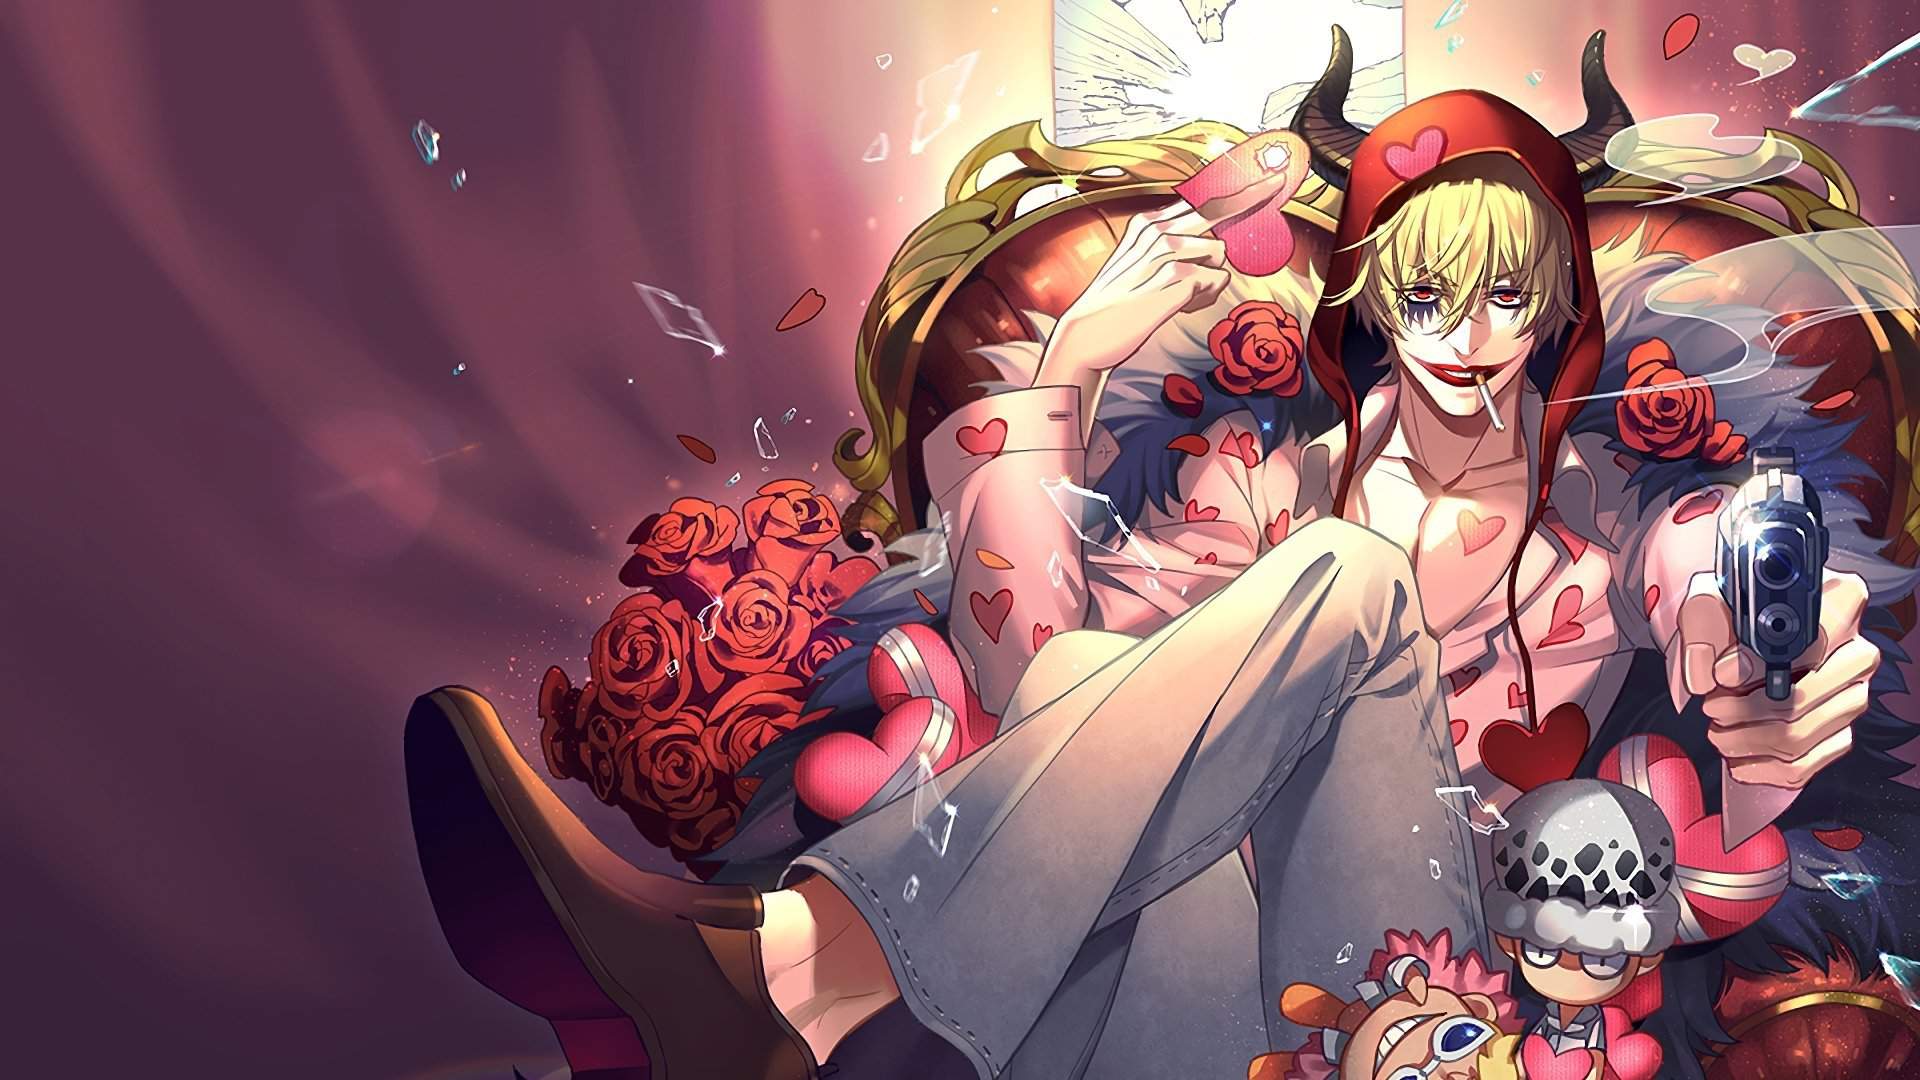 In what Tier is Corazon/Rosinate among "Male" One Piece character...